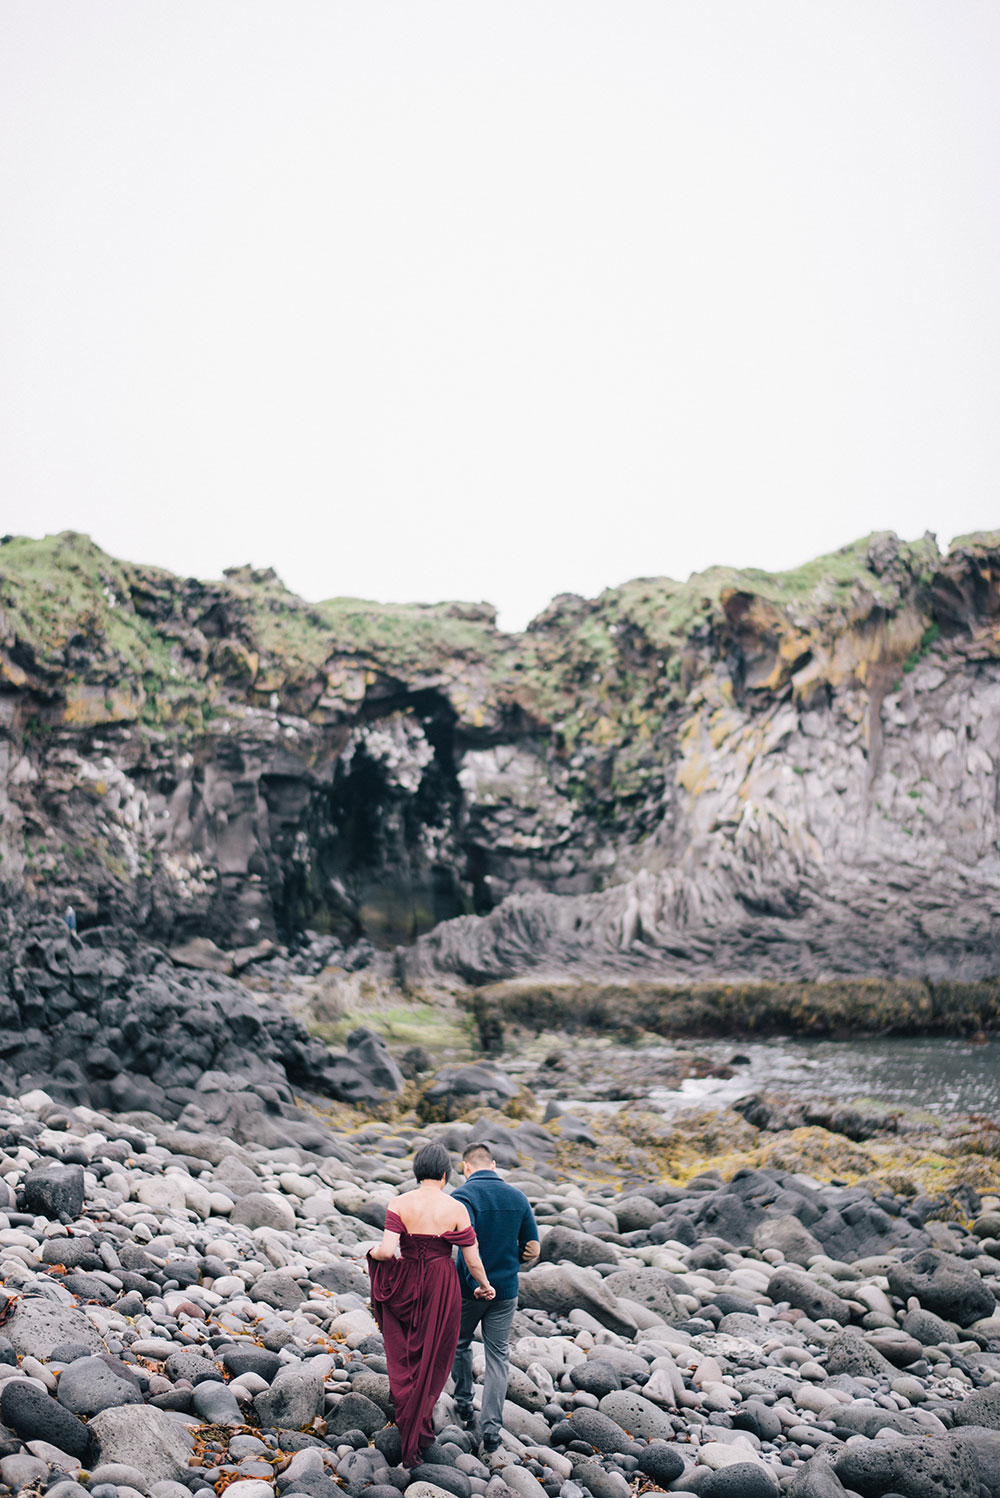 Bridal portraits in Iceland. Photo by Ben Yew Photography. www.theweddingnotebook.com